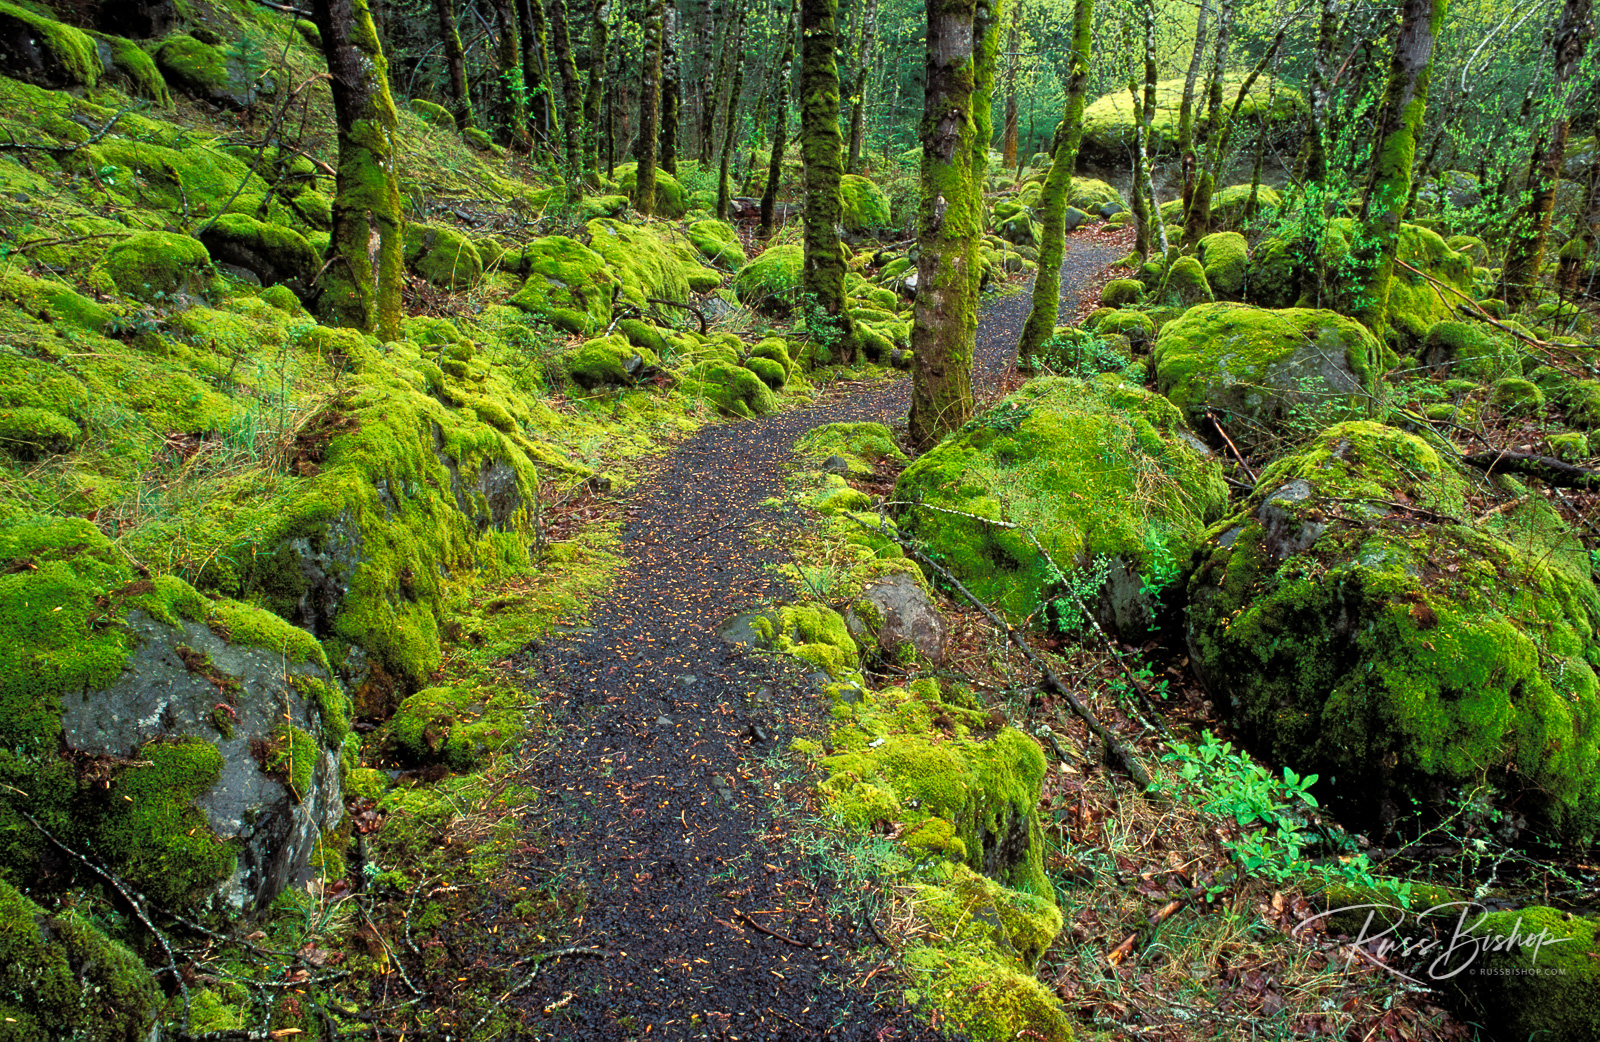 Trail through moss covered forest along the Columbia River, Fort Cascade National Historic Site, Washington